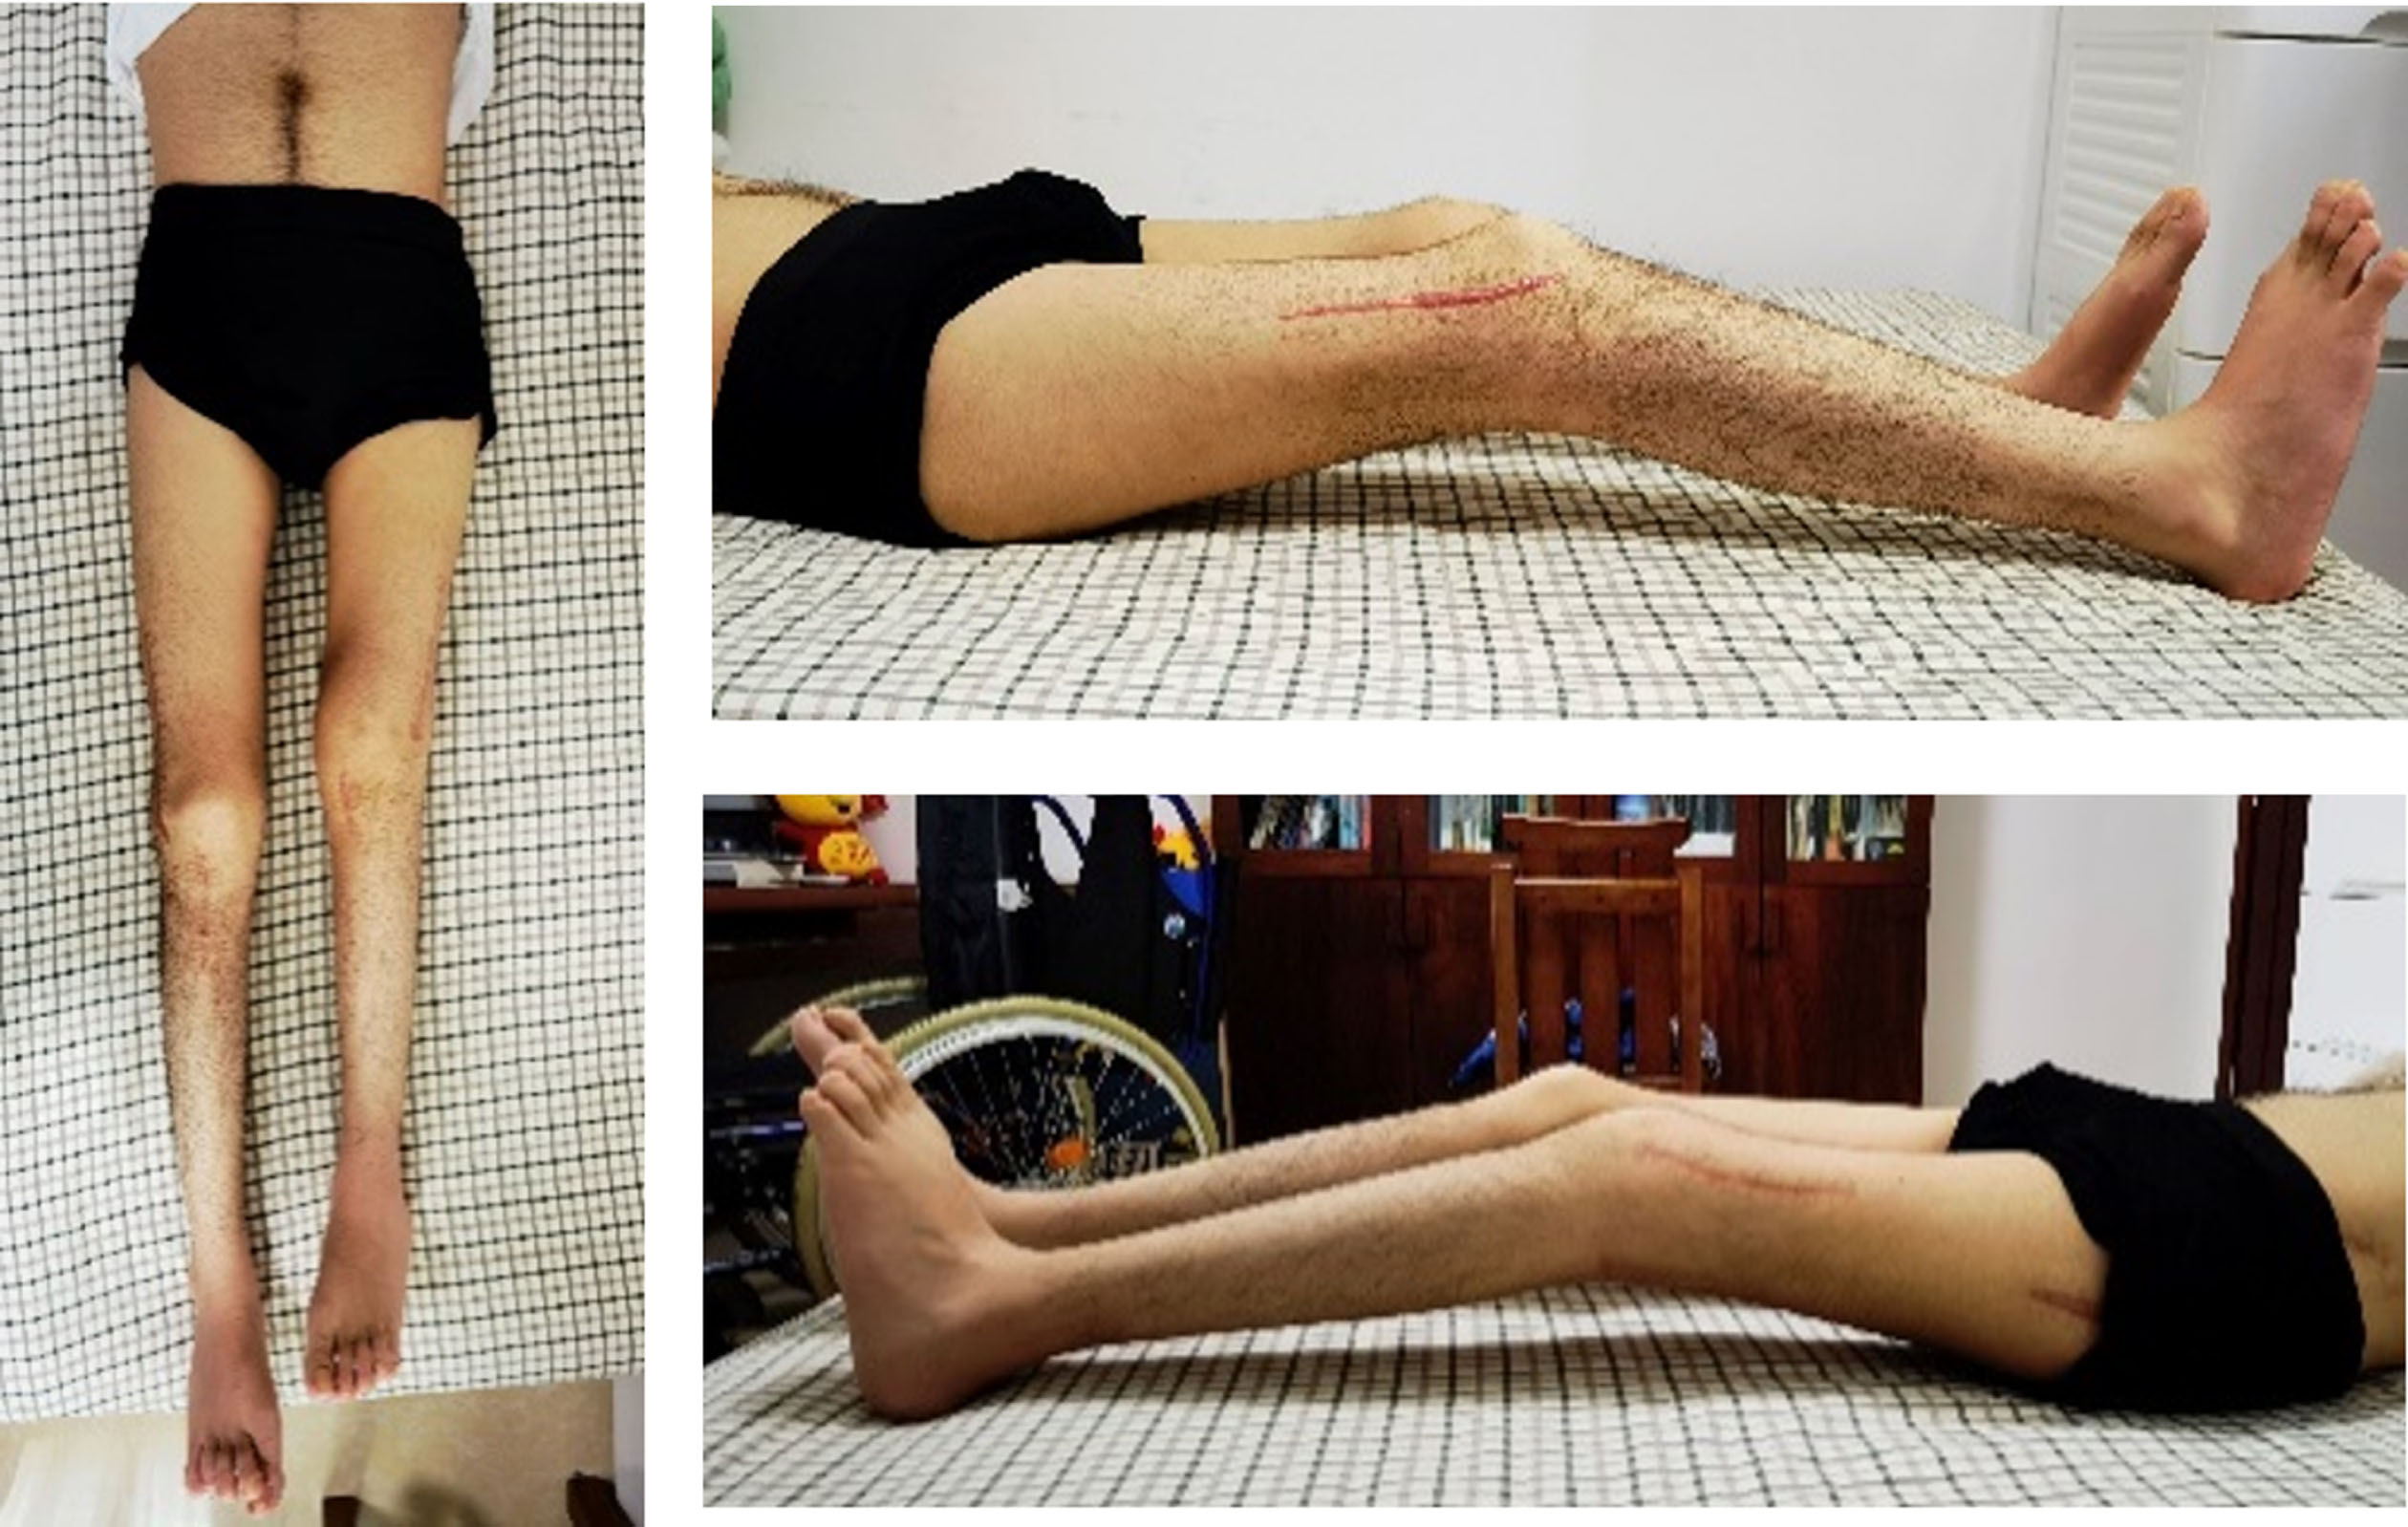 Postoperative alignment with improvement of hip extension, knee extension, and patella alta.